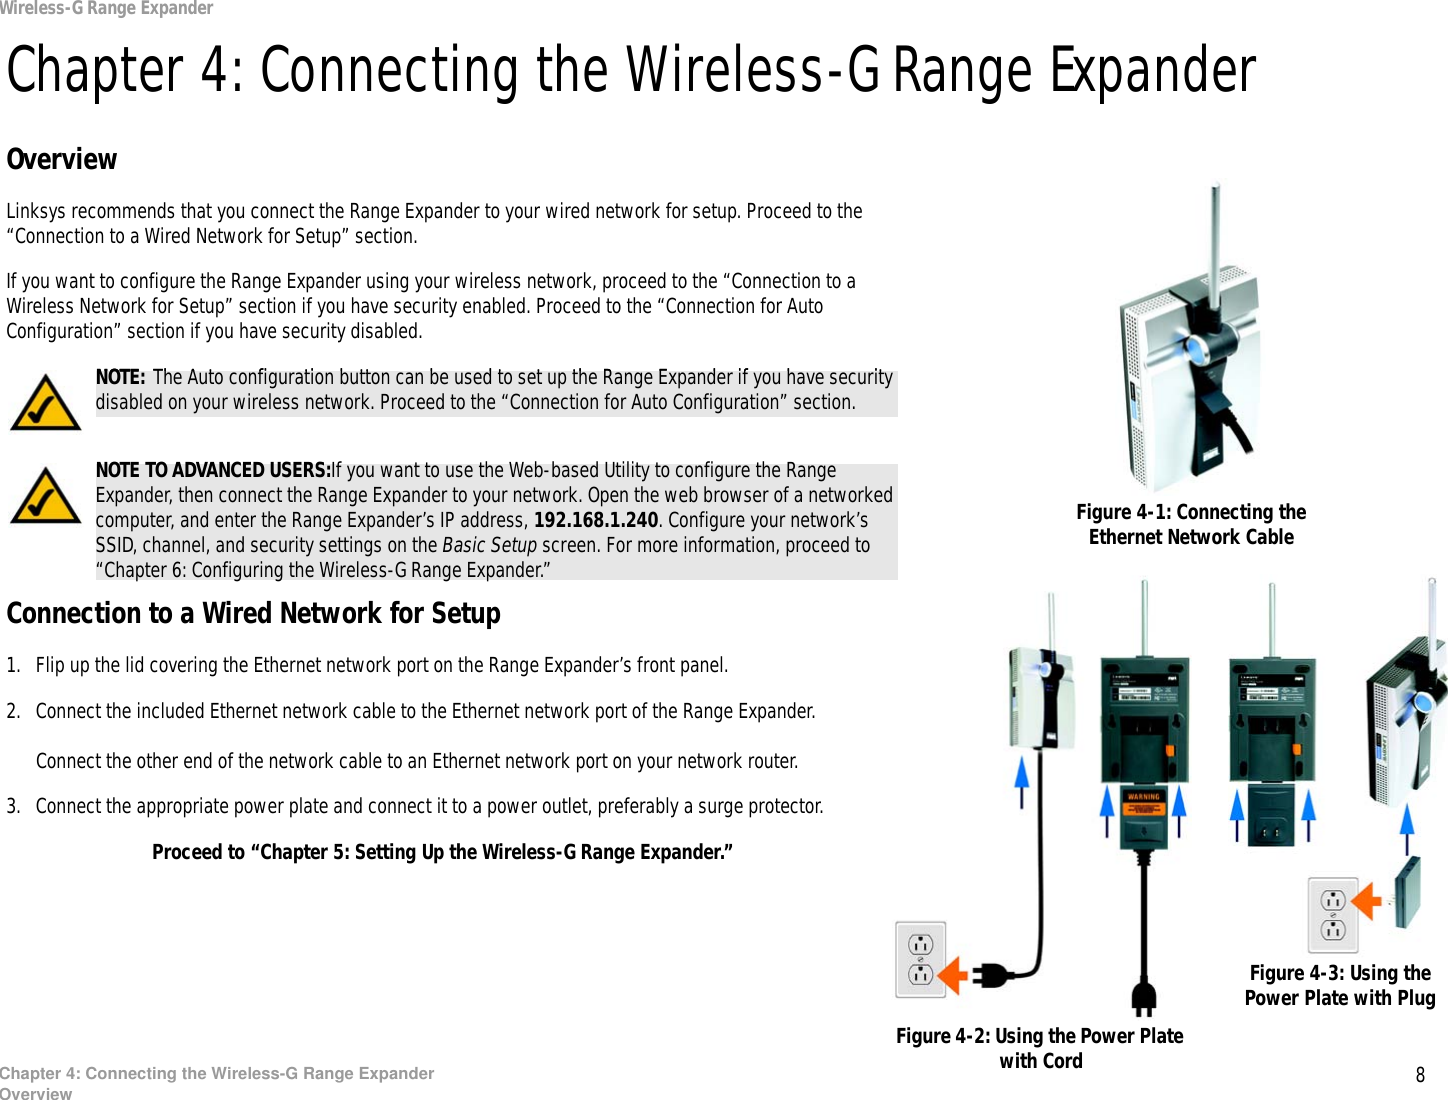 8Chapter 4: Connecting the Wireless-G Range ExpanderOverviewWireless-G Range ExpanderChapter 4: Connecting the Wireless-G Range ExpanderOverviewLinksys recommends that you connect the Range Expander to your wired network for setup. Proceed to the “Connection to a Wired Network for Setup” section. If you want to configure the Range Expander using your wireless network, proceed to the “Connection to a Wireless Network for Setup” section if you have security enabled. Proceed to the “Connection for Auto Configuration” section if you have security disabled.Connection to a Wired Network for Setup1. Flip up the lid covering the Ethernet network port on the Range Expander’s front panel.2. Connect the included Ethernet network cable to the Ethernet network port of the Range Expander.Connect the other end of the network cable to an Ethernet network port on your network router.3. Connect the appropriate power plate and connect it to a power outlet, preferably a surge protector.Proceed to “Chapter 5: Setting Up the Wireless-G Range Expander.”Figure 4-2: Using the Power Plate with CordFigure 4-3: Using the Power Plate with PlugFigure 4-1: Connecting the Ethernet Network CableNOTE: The Auto configuration button can be used to set up the Range Expander if you have security disabled on your wireless network. Proceed to the “Connection for Auto Configuration” section.NOTE: The Auto configuration button can be used to set up the Range Expander if you have security disabled on your wireless network. Proceed to the “Connection for Auto Configuration” section.NOTE TO ADVANCED USERS:If you want to use the Web-based Utility to configure the Range Expander, then connect the Range Expander to your network. Open the web browser of a networked computer, and enter the Range Expander’s IP address, 192.168.1.240. Configure your network’s SSID, channel, and security settings on the Basic Setup screen. For more information, proceed to “Chapter 6: Configuring the Wireless-G Range Expander.”